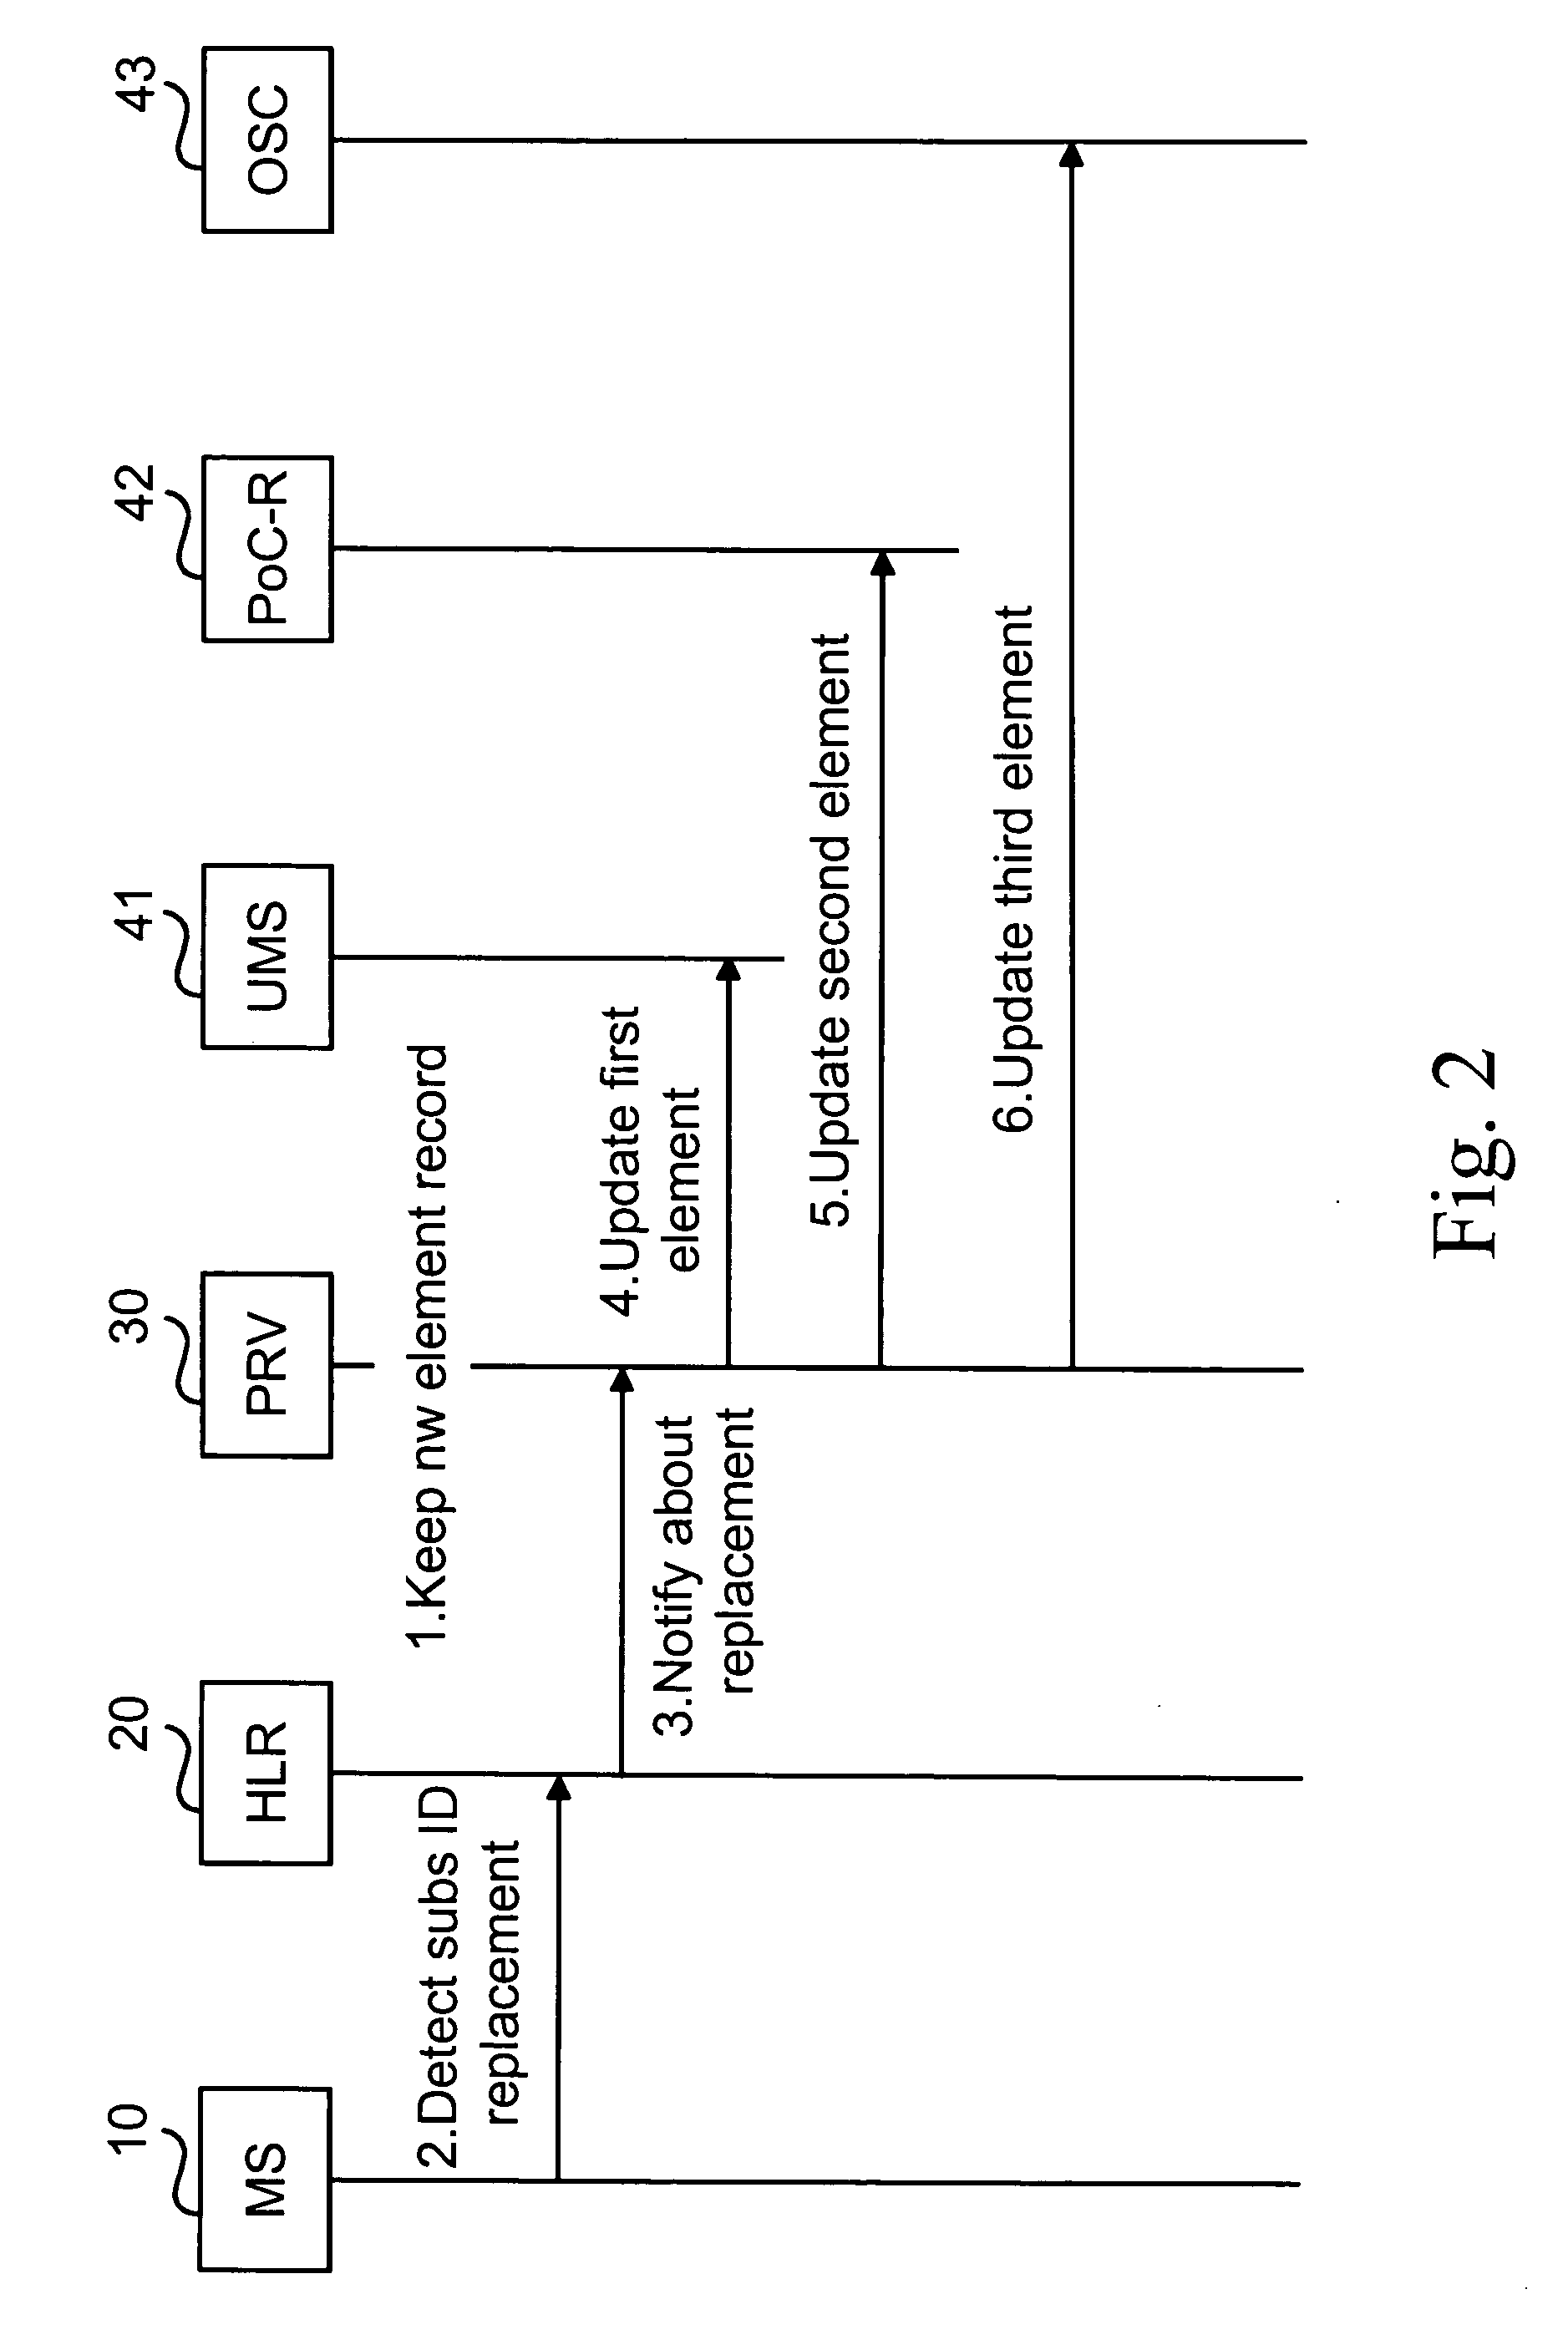 Automatic replacement of a mobile sub-scriber identity code